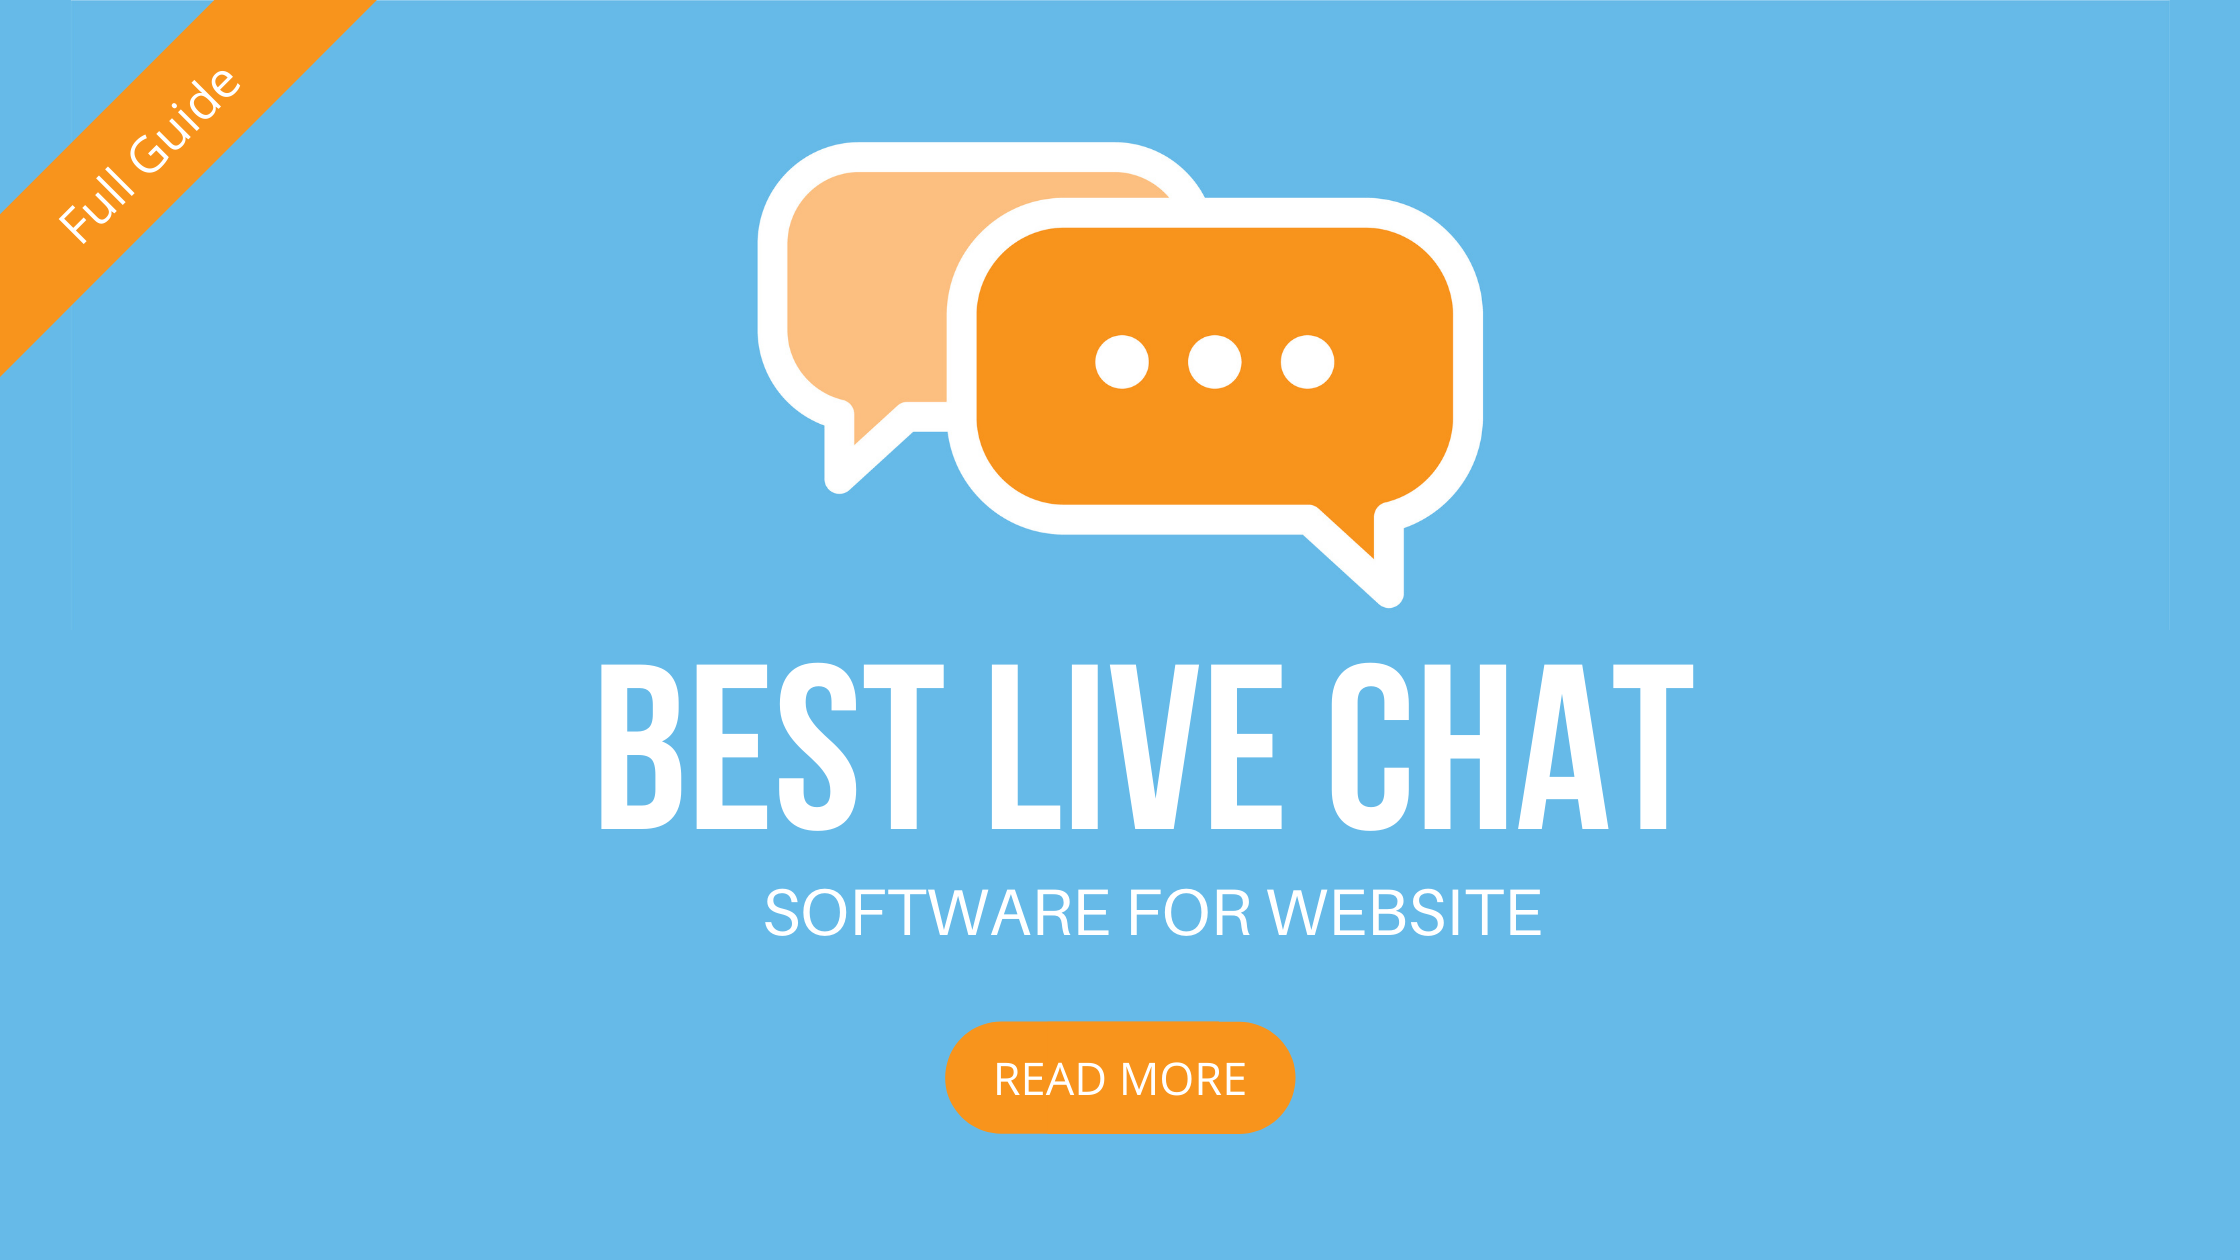 Websites with live chat